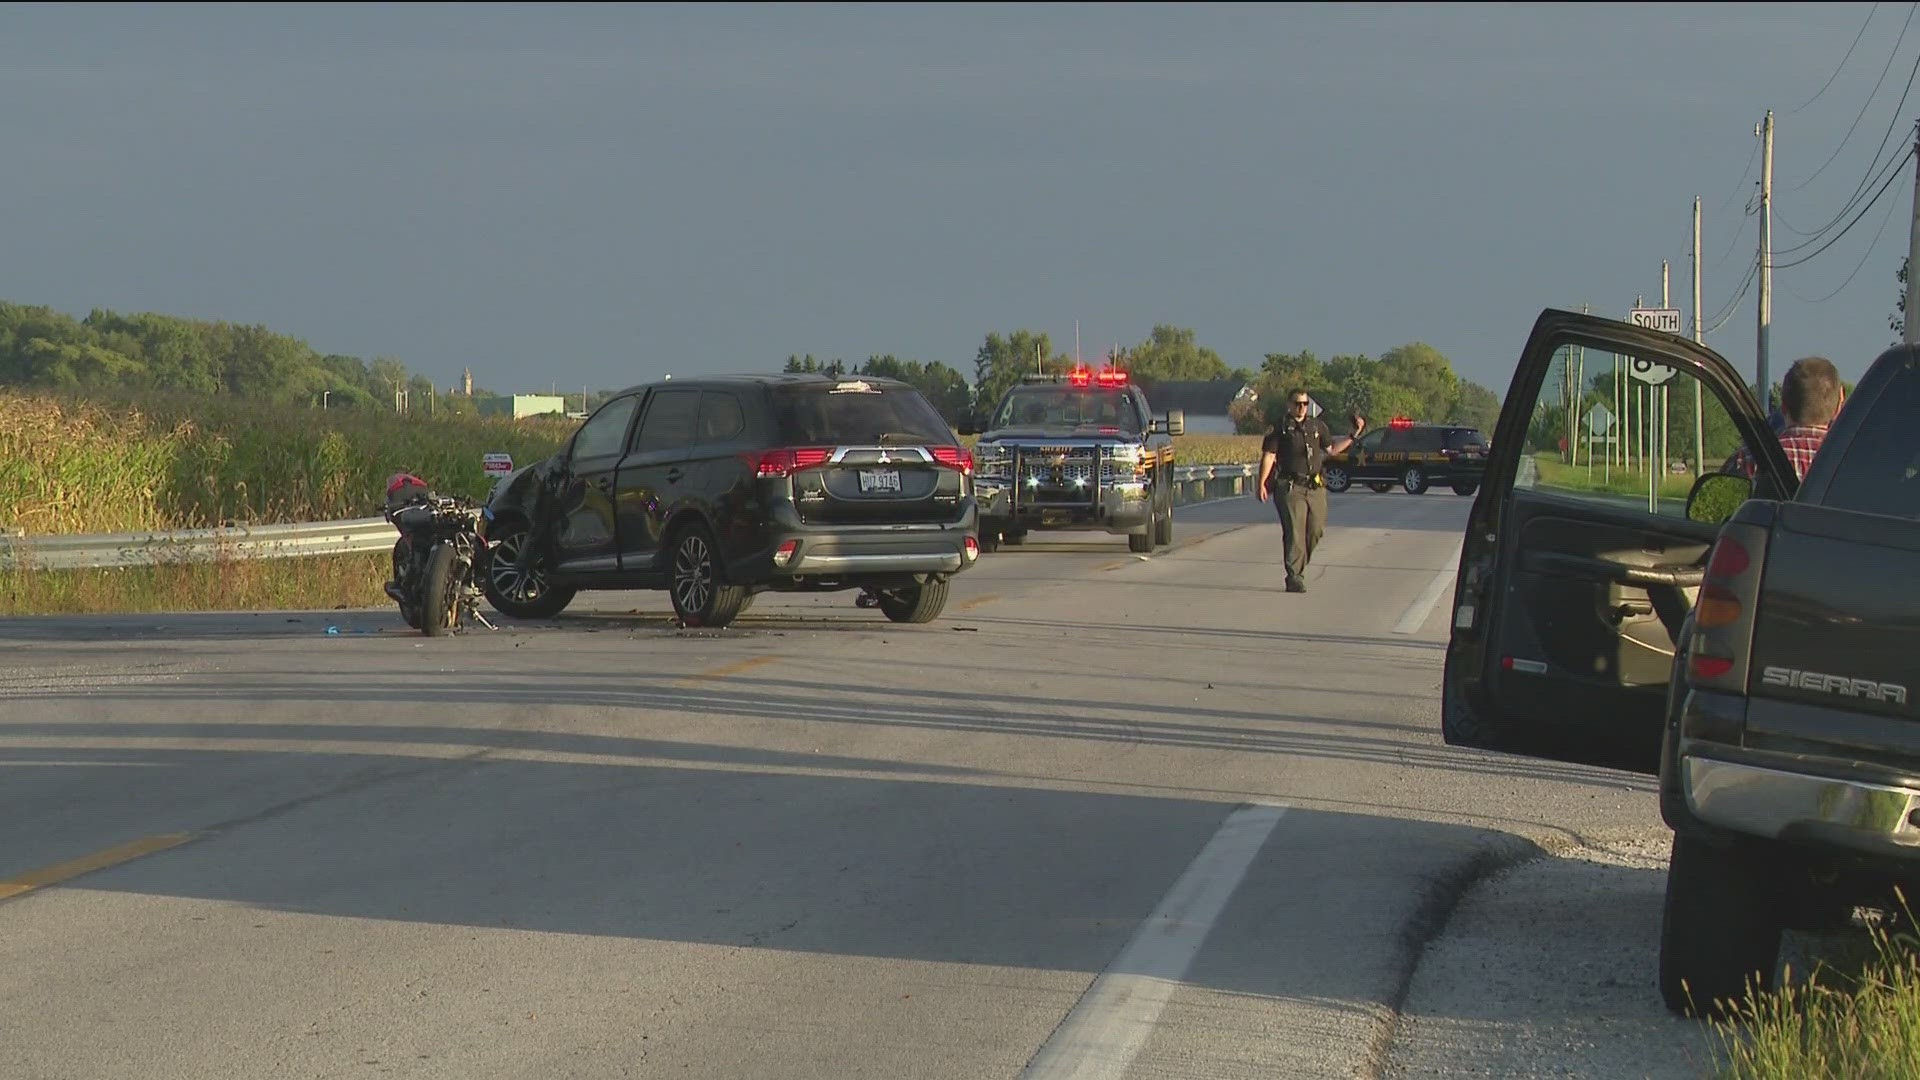 The car crossed the intersection and failed to stop at a stop sign, causing the motorcycle to crash into the car, according to the Wood County Sheriff's Office.